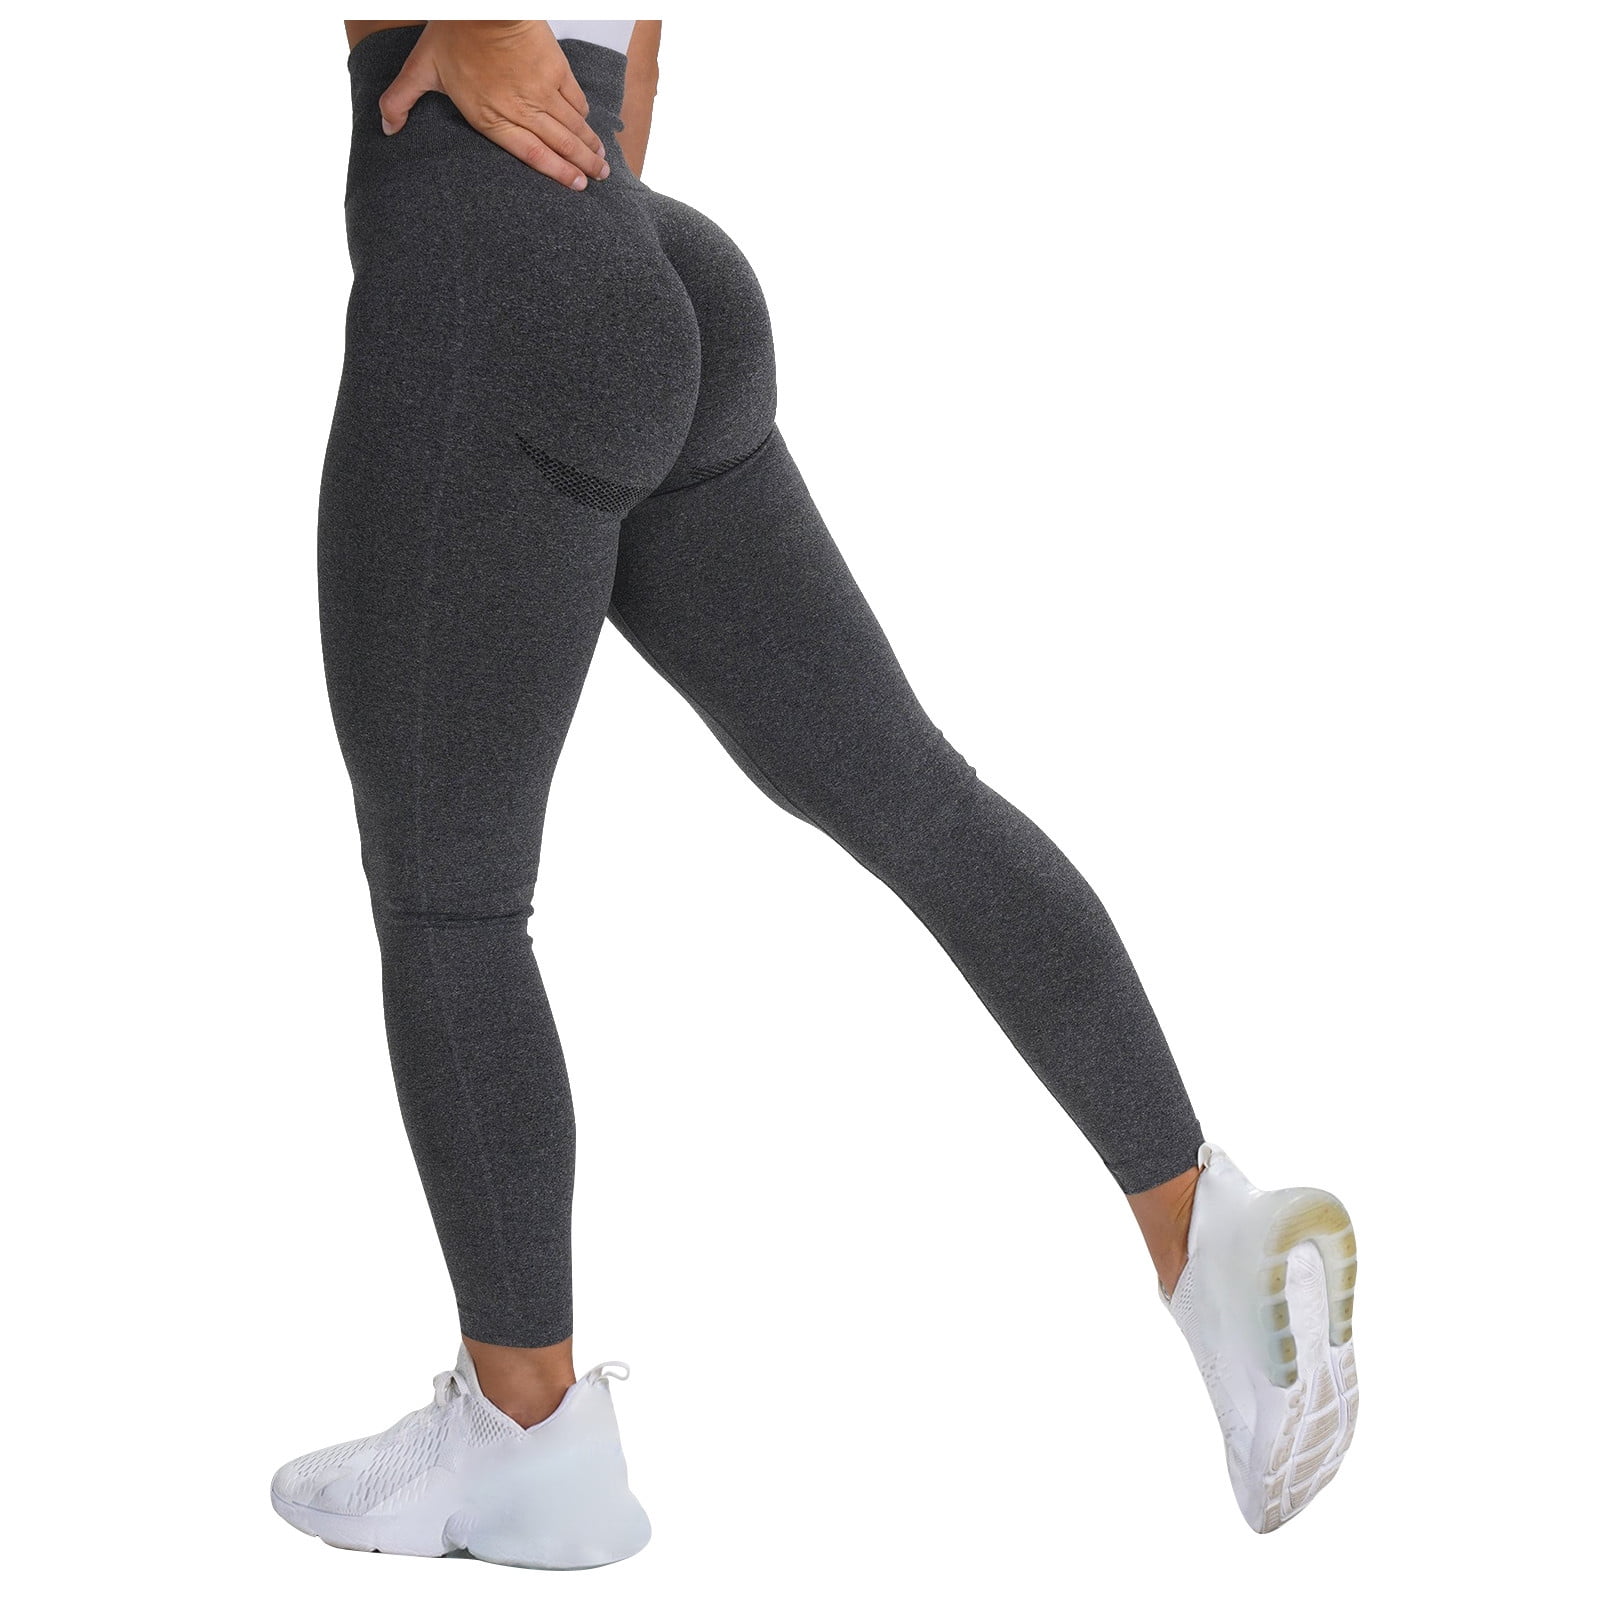 Frehsky yoga pants Women's Pure Color -lifting Sports